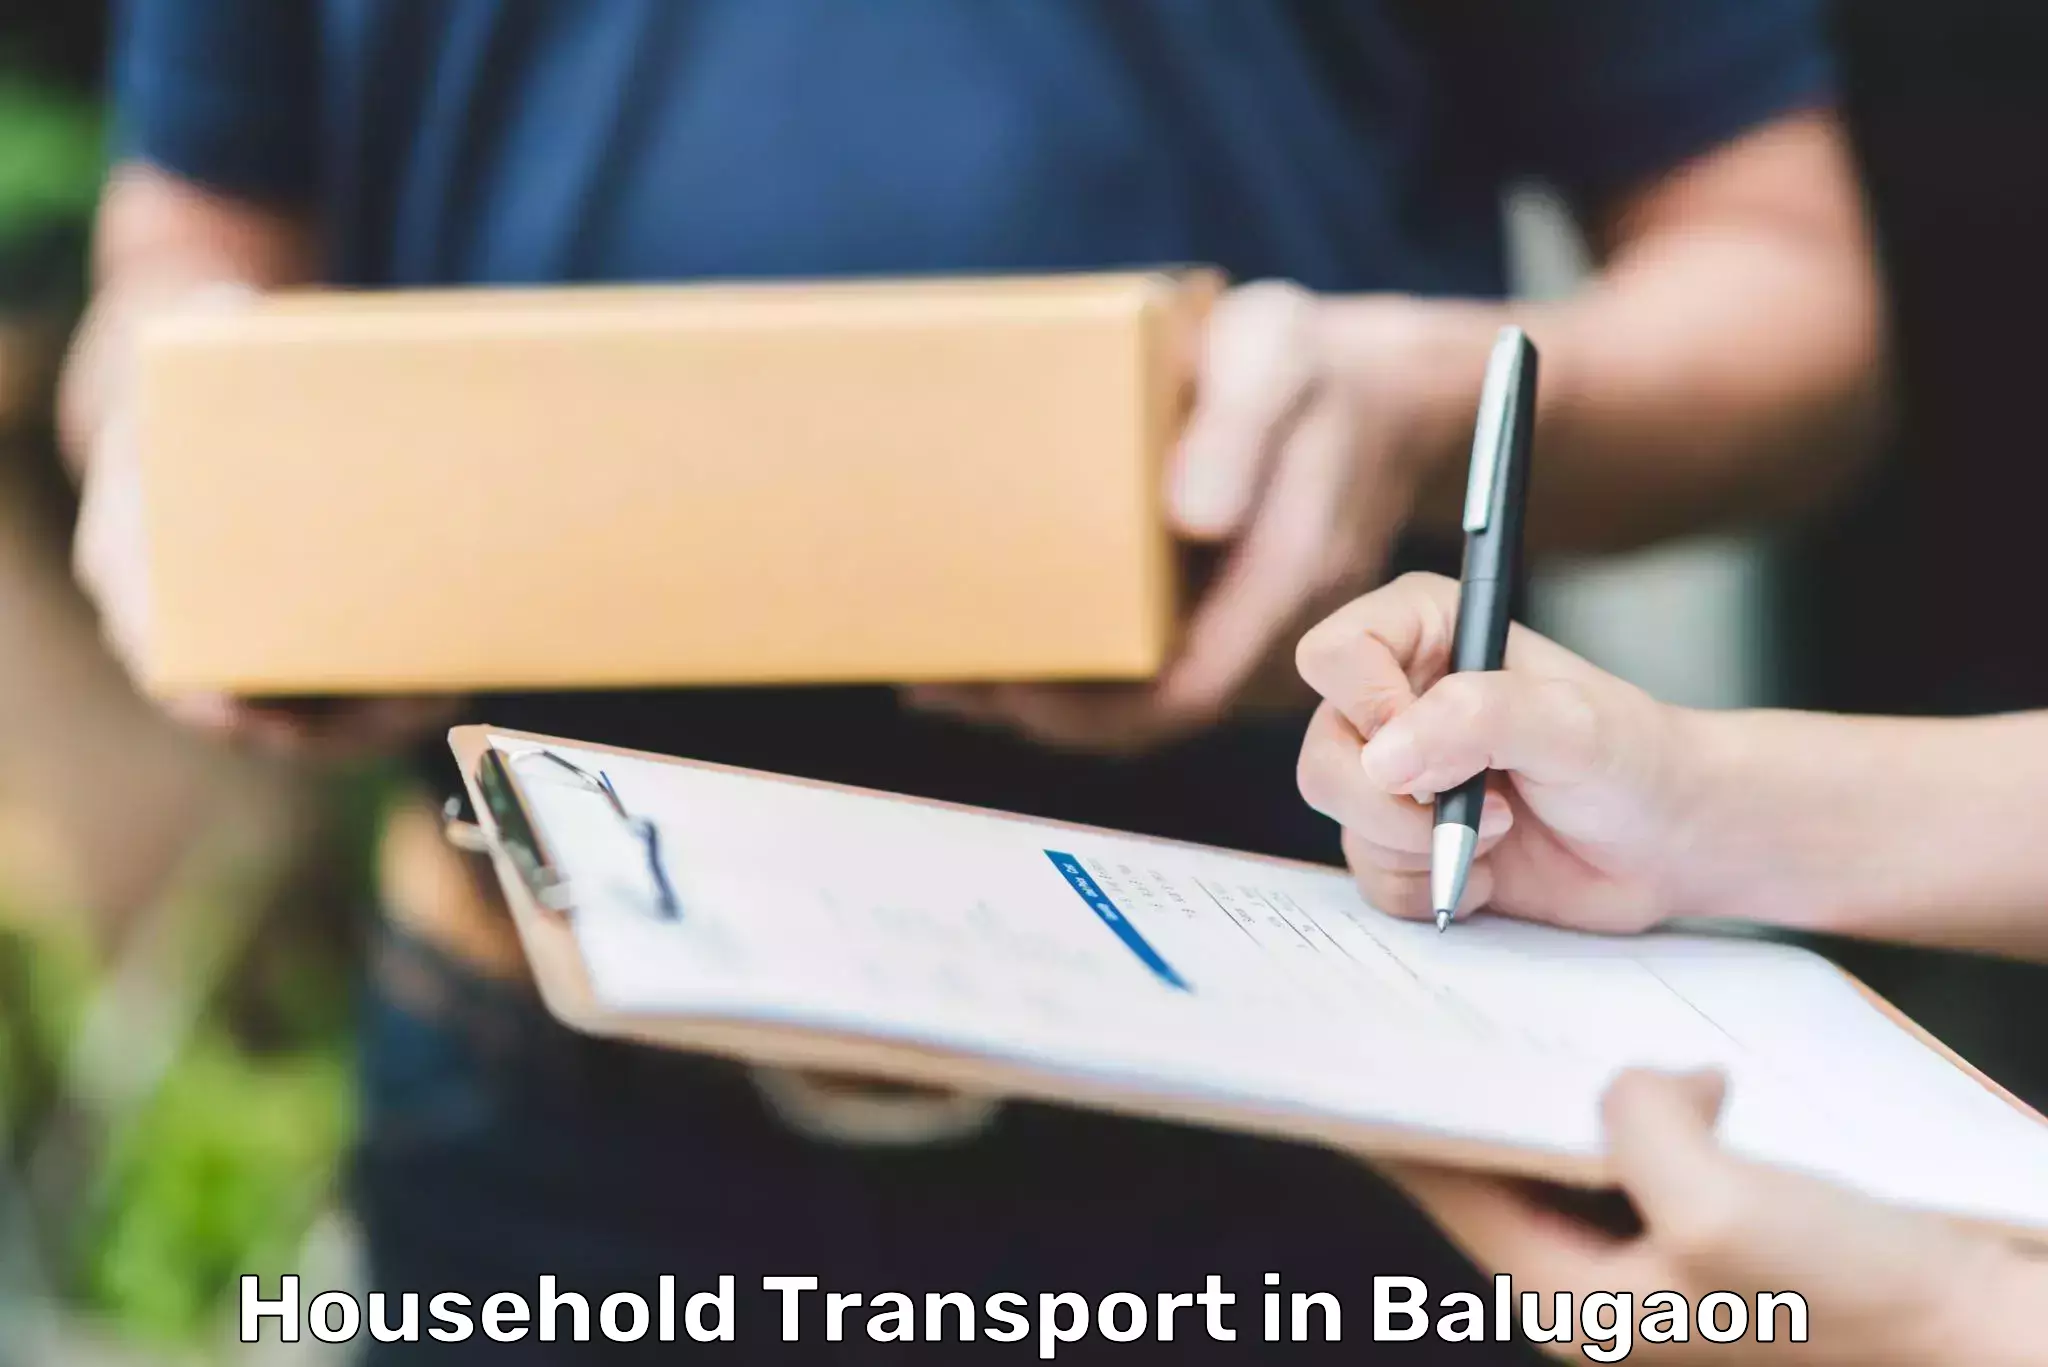 Furniture relocation experts in Balugaon